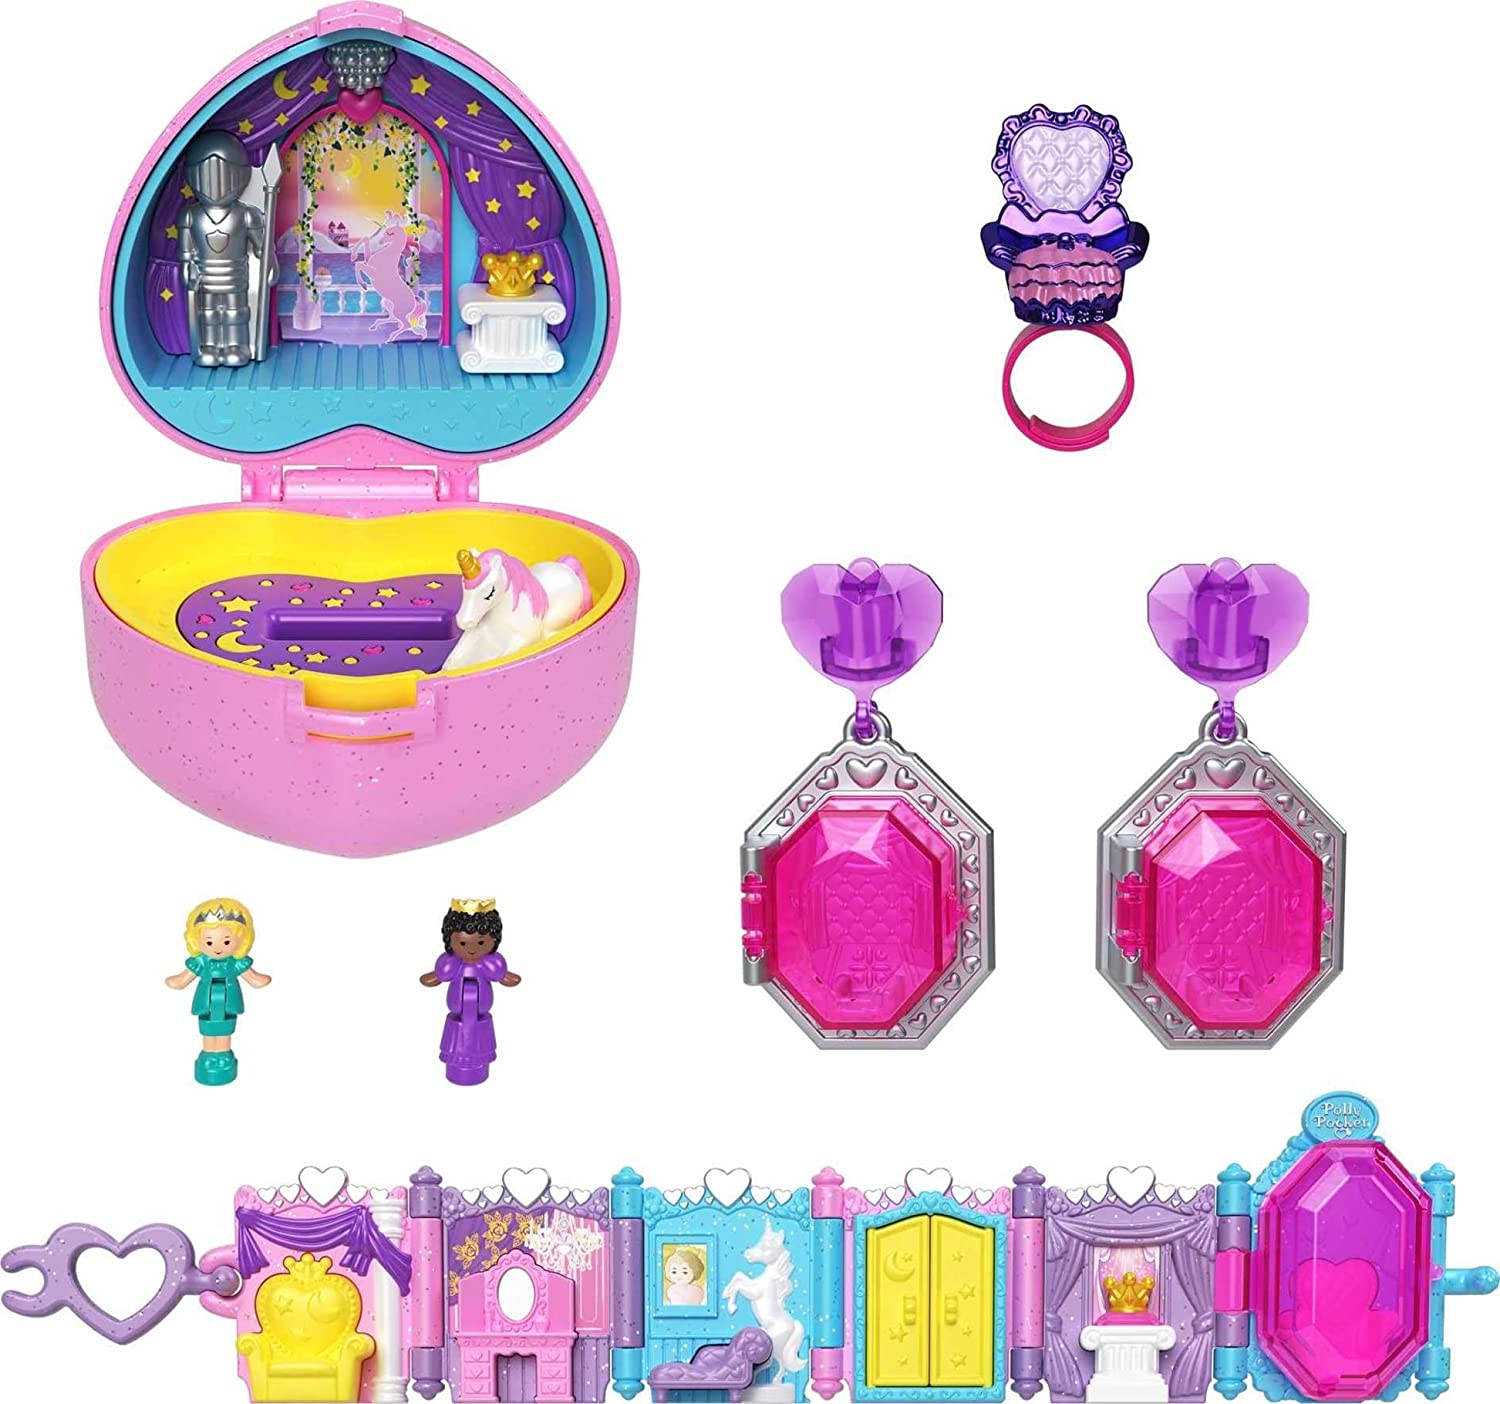 Polly Pocket Collector Compact w/ 2 Dolls and Keepsake Collection Royal Ball Jewelry Set (Unicorn Castle Theme) $10.76 + Free Shipping w/ Prime or on $25+